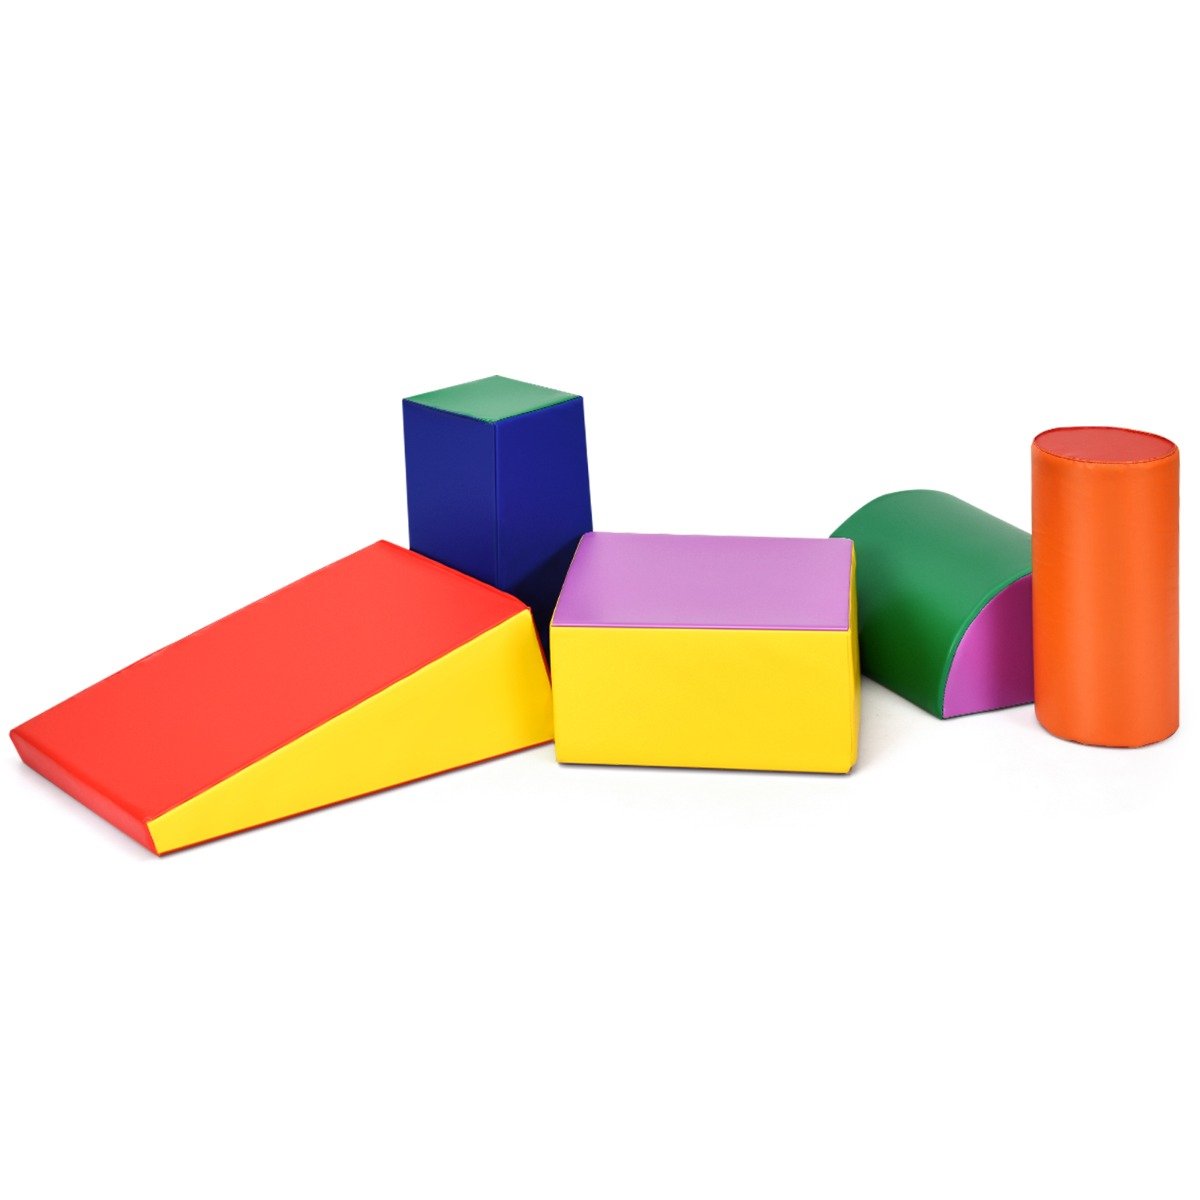 Toddler Crawl Climb Set - Soft Foam Shapes for Active Play